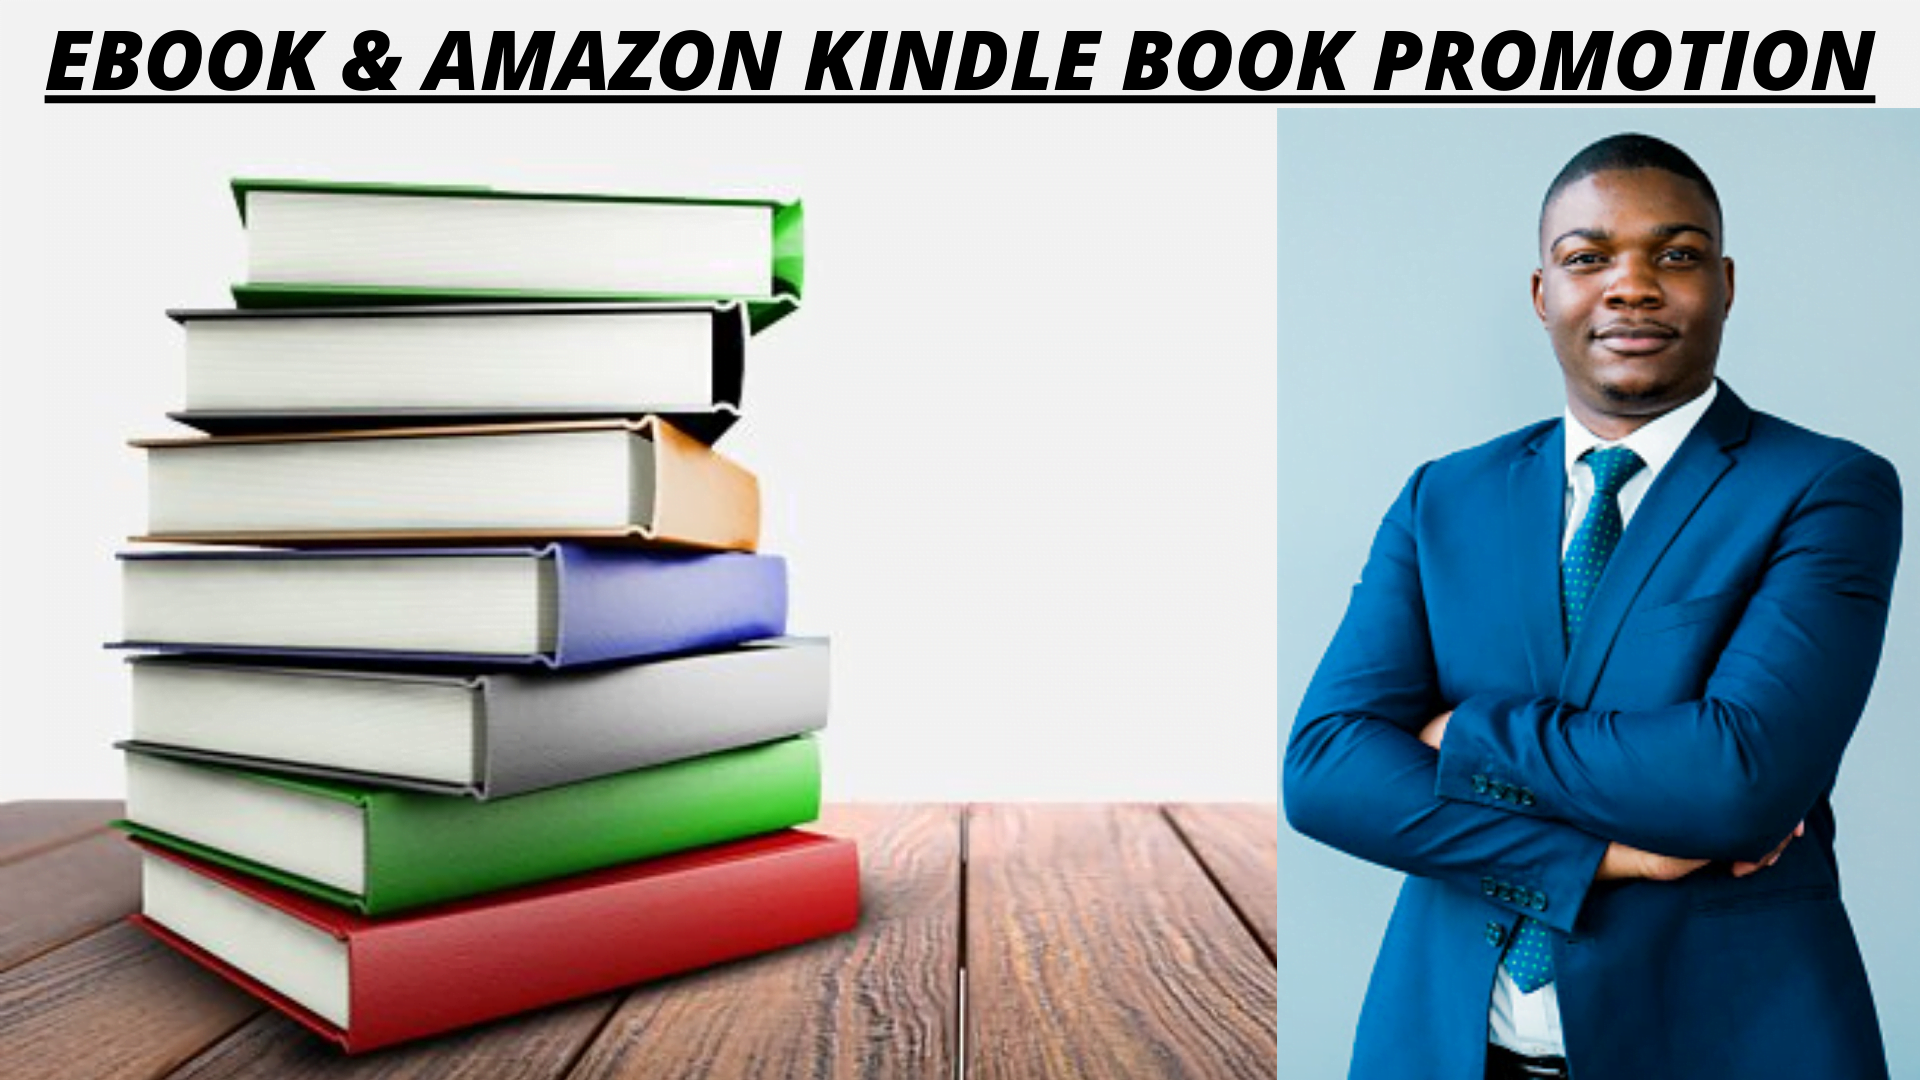 I will do organic promotion for ebook, amazon kindle, christian book and children book, FiverrBox